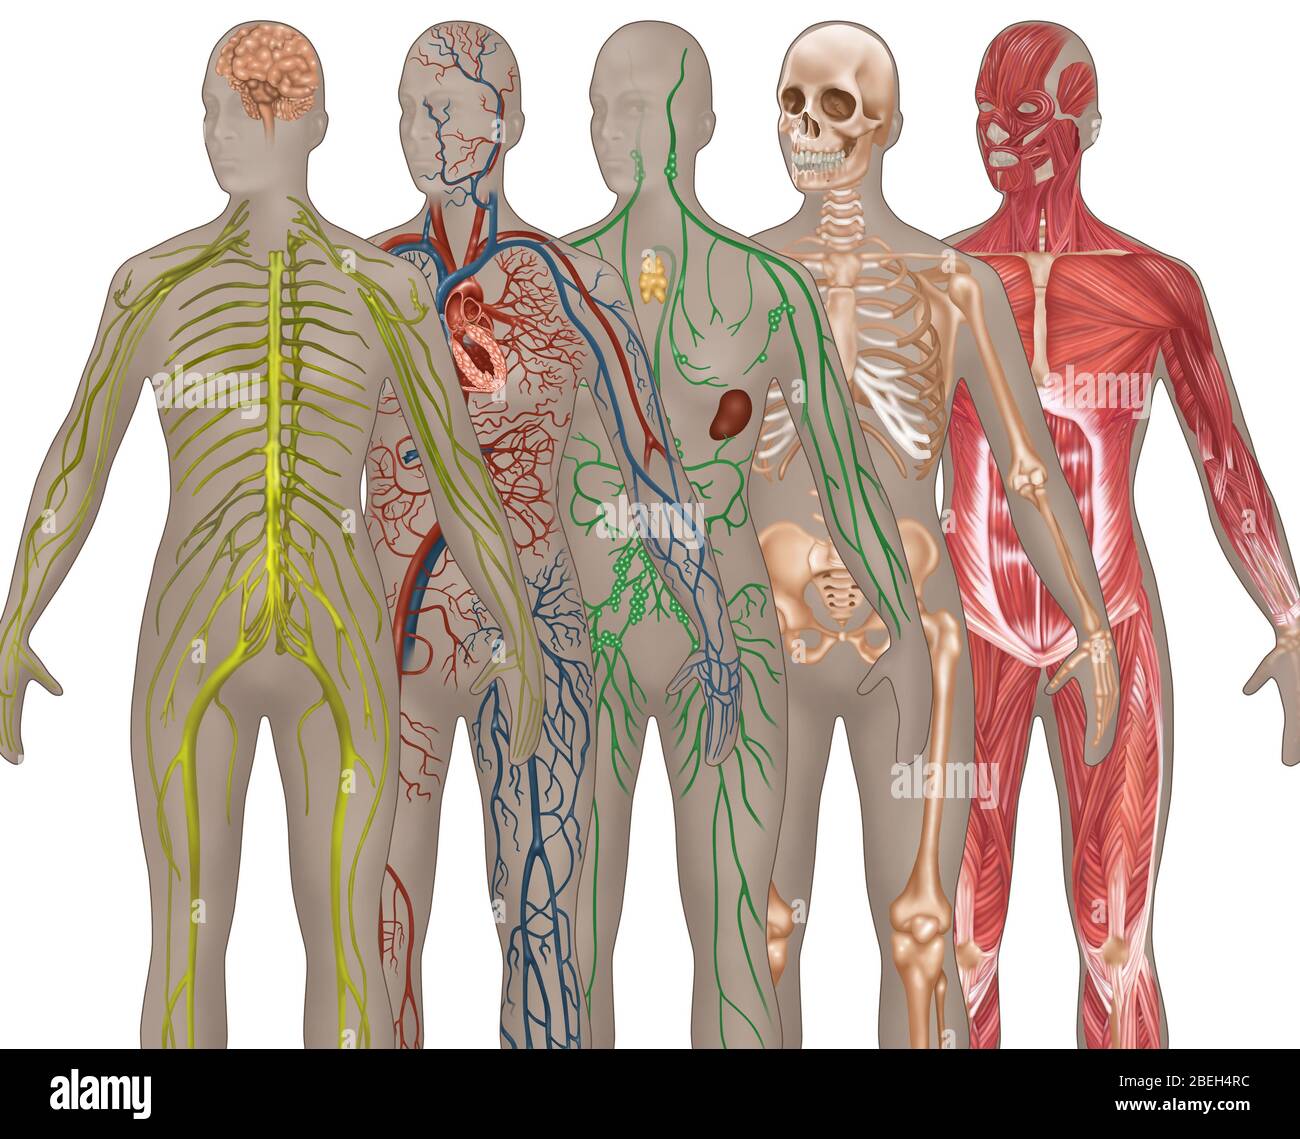 Female Anatomy High Resolution Stock Photography and Images - Alamy